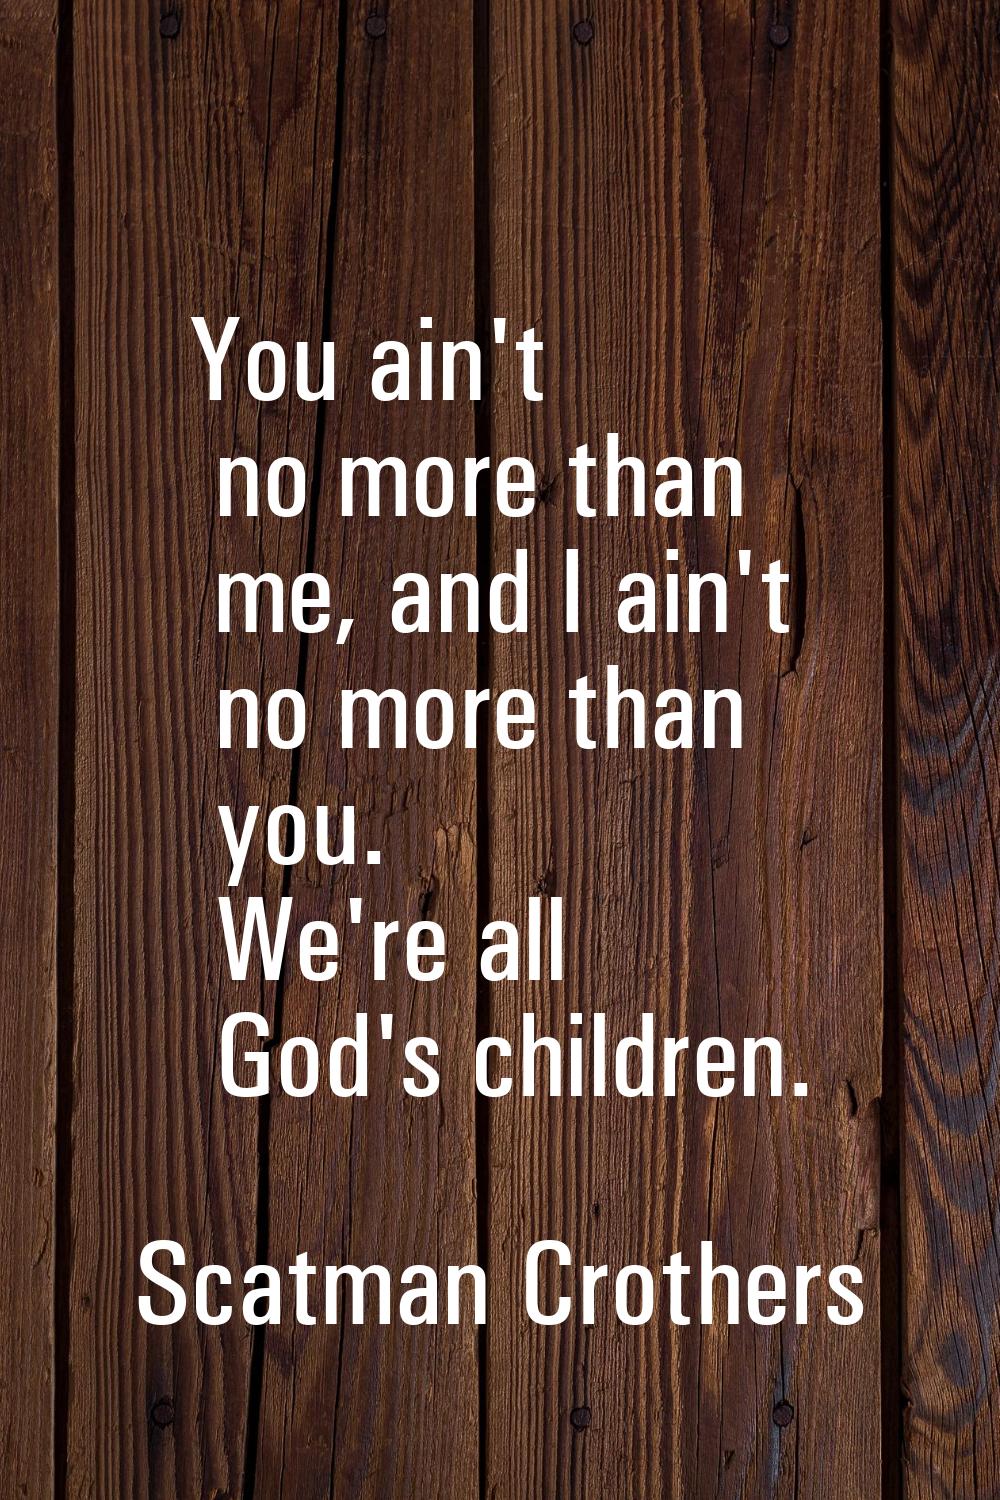 You ain't no more than me, and I ain't no more than you. We're all God's children.